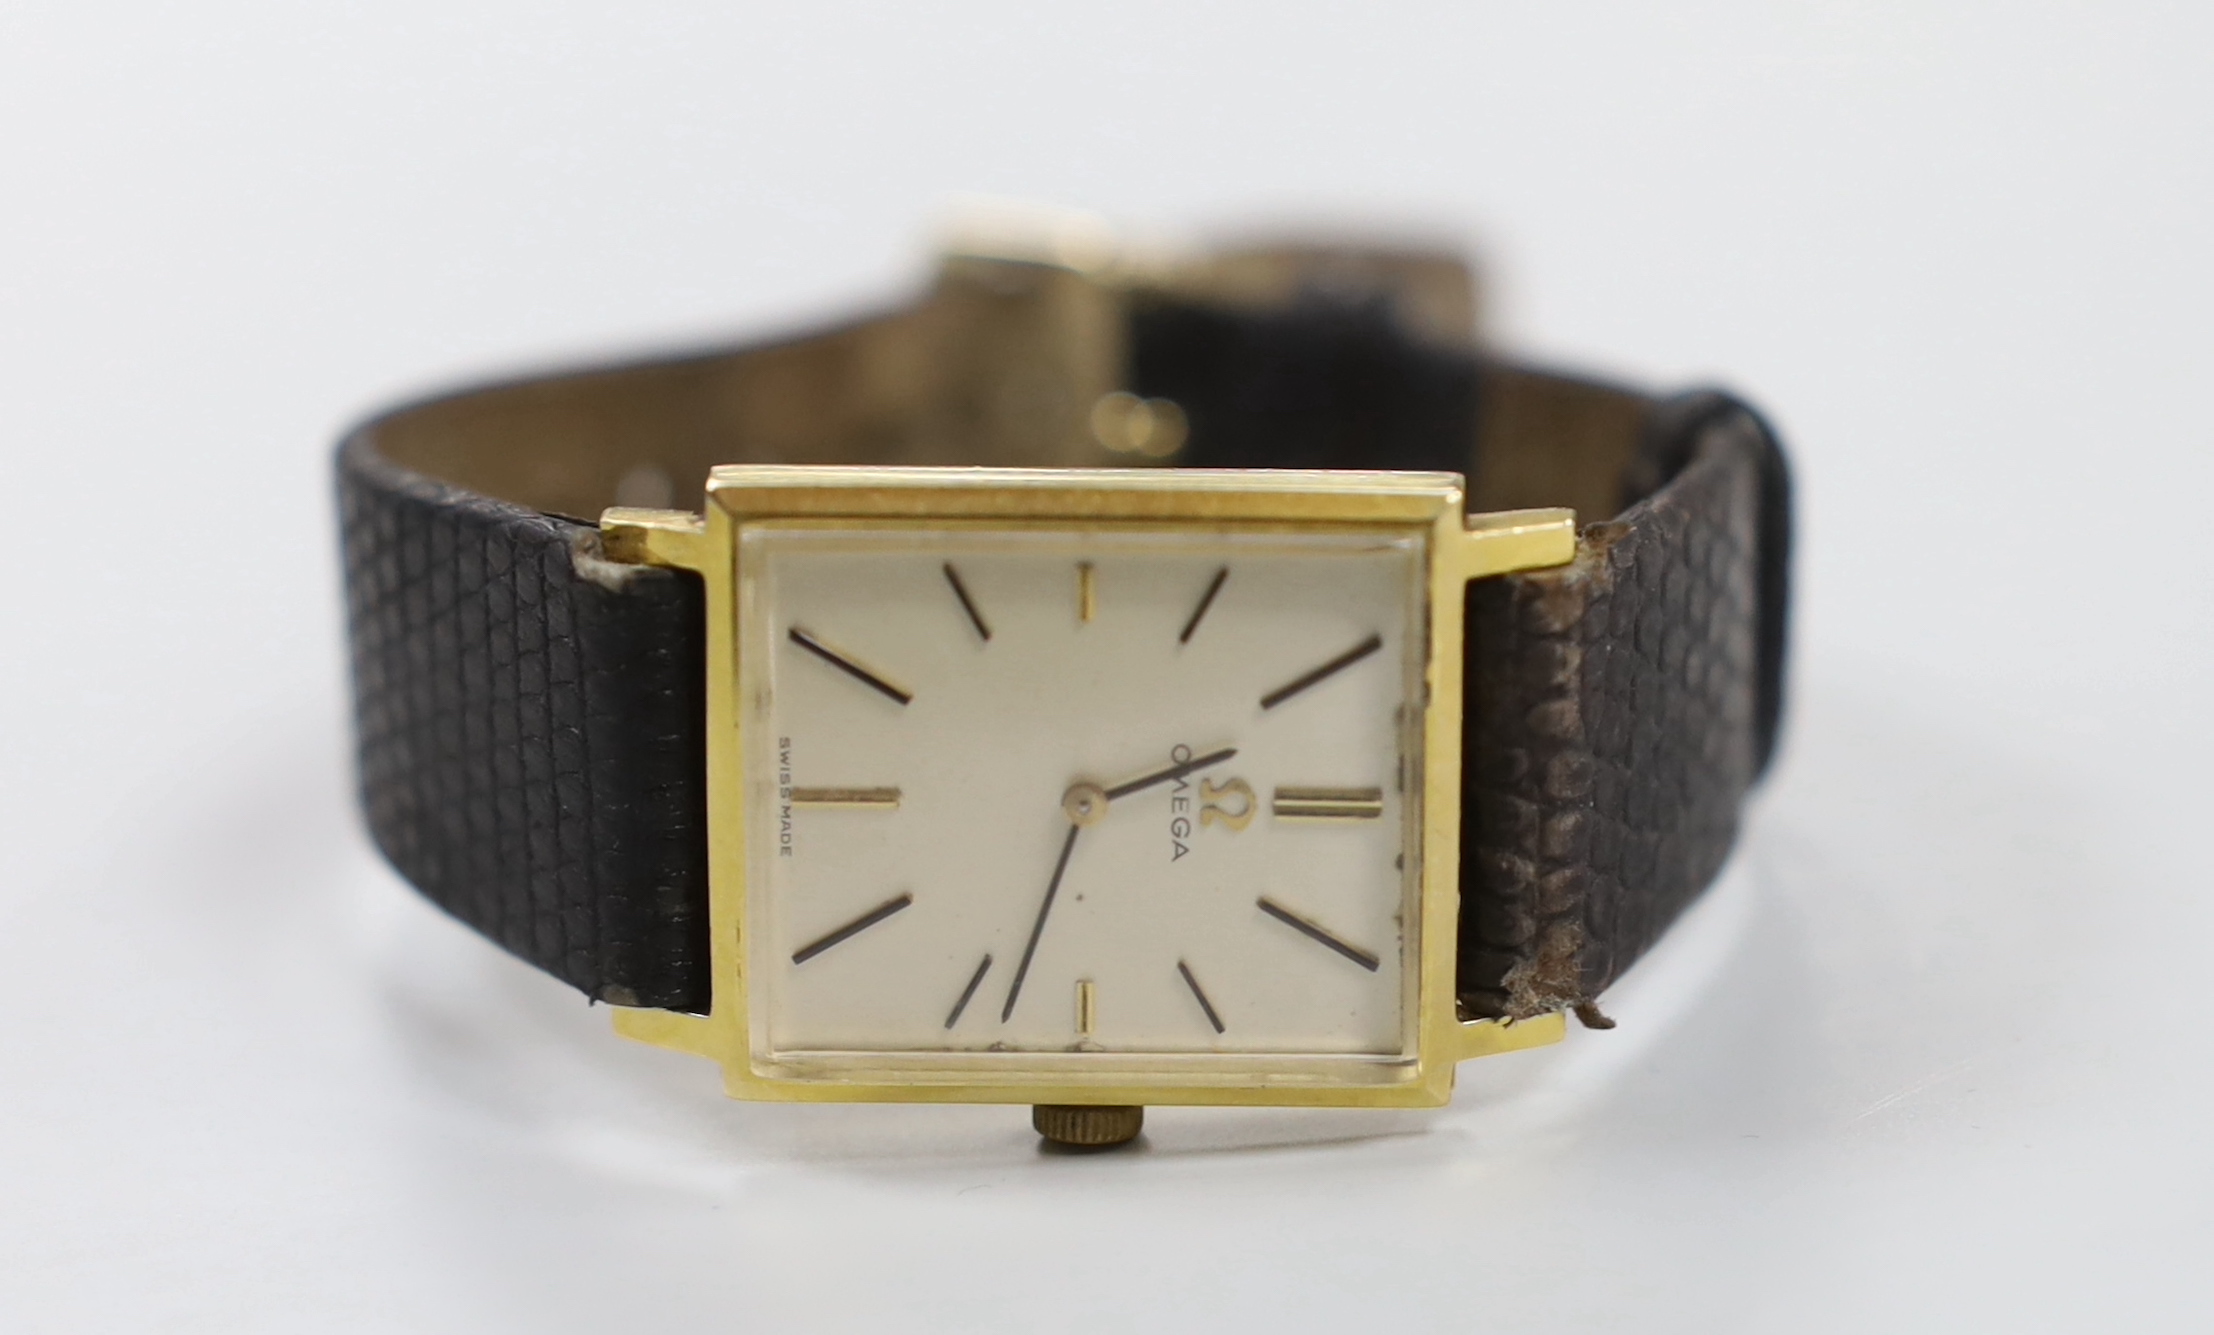 A gentleman's 18k Omega manual wind rectangular dress wrist watch, on associated leather strap, case diameter 24mm, no box or papers.